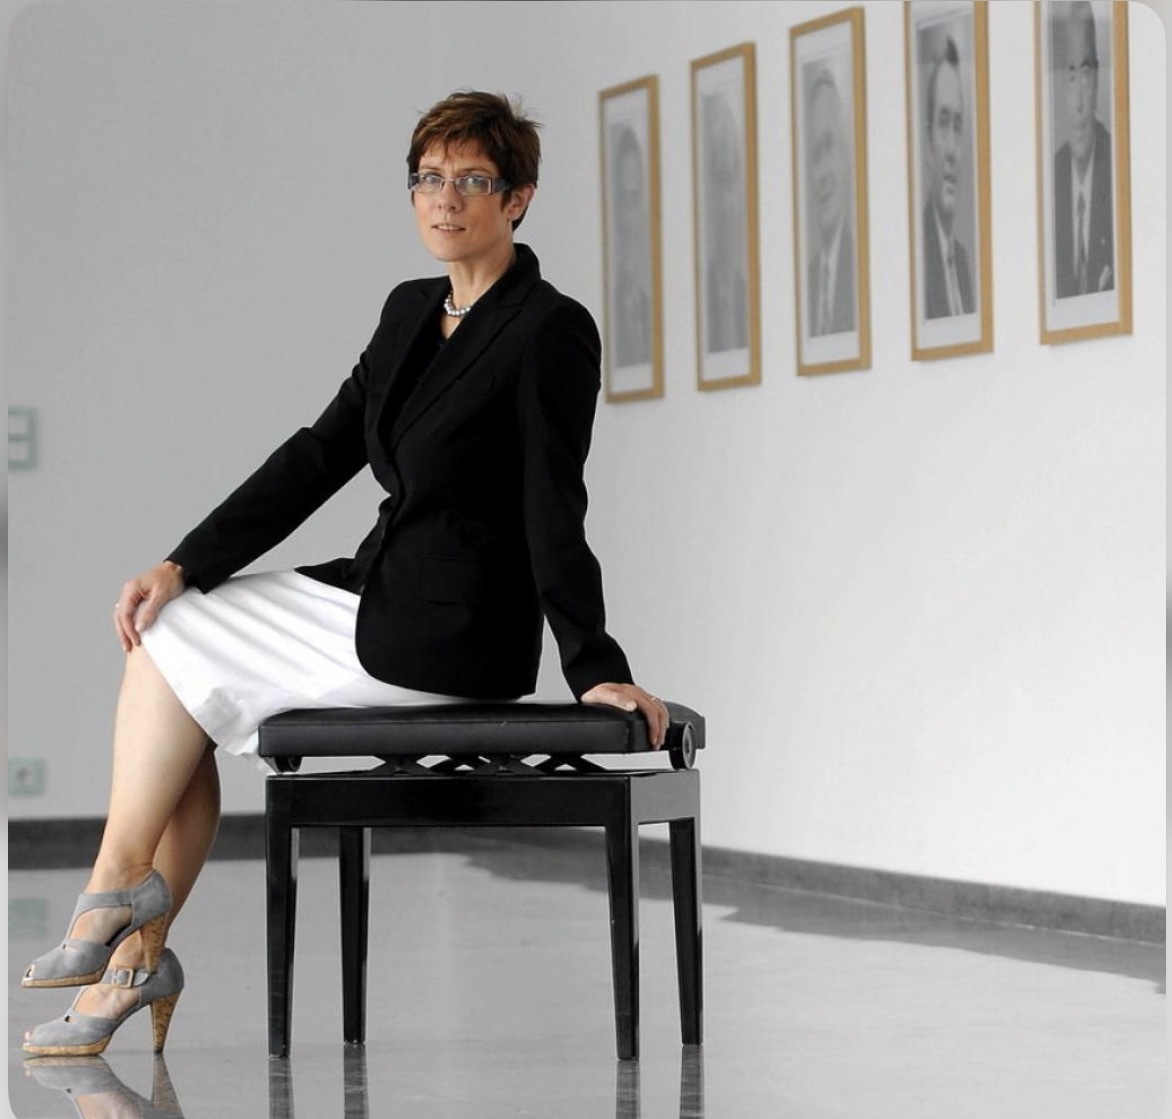 People who liked Annegret Kramp-Karrenbauer's feet, also liked.